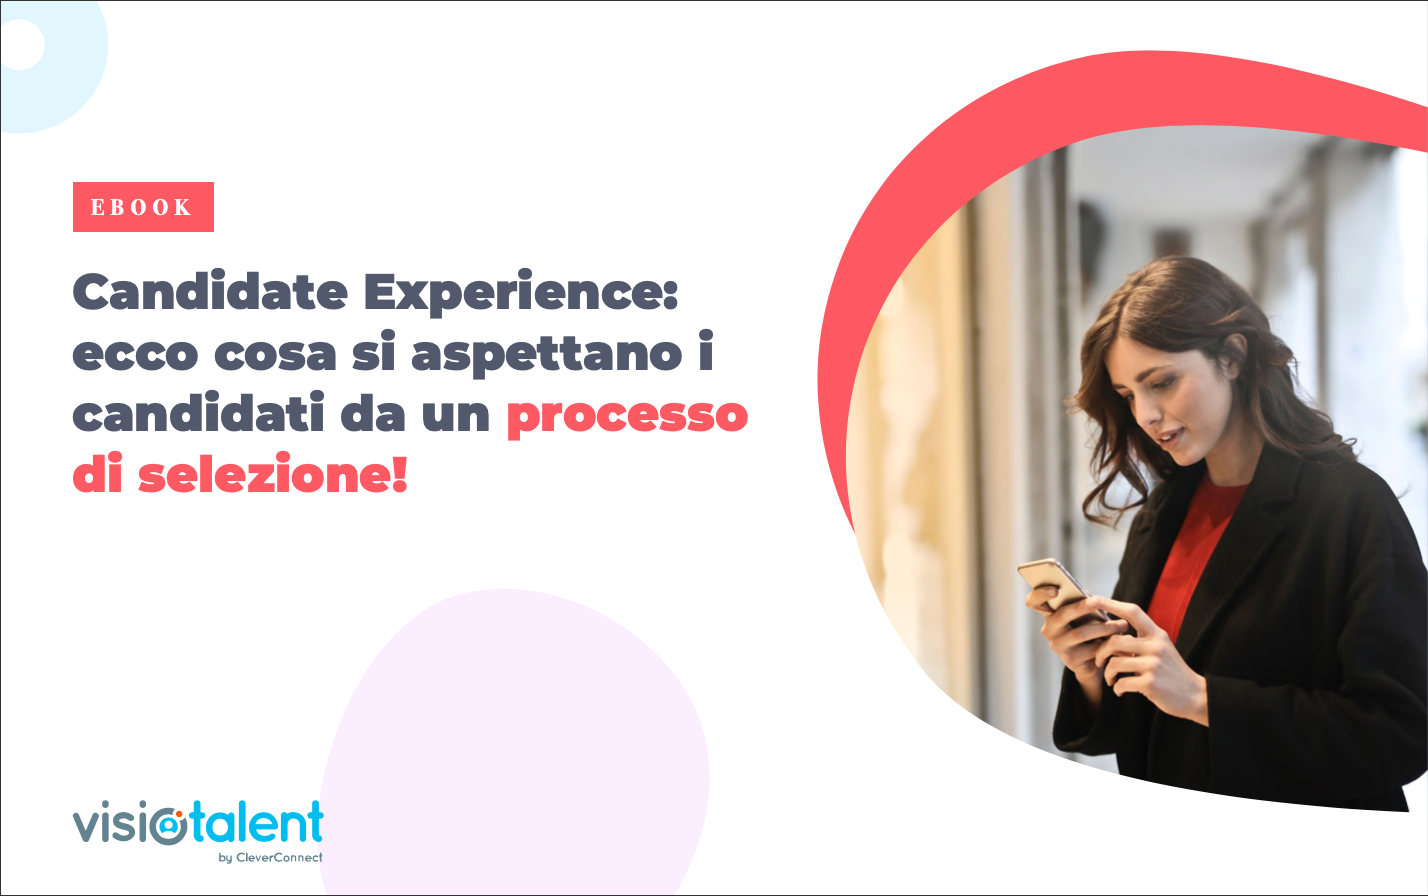 La candidate experience con Visiotalent